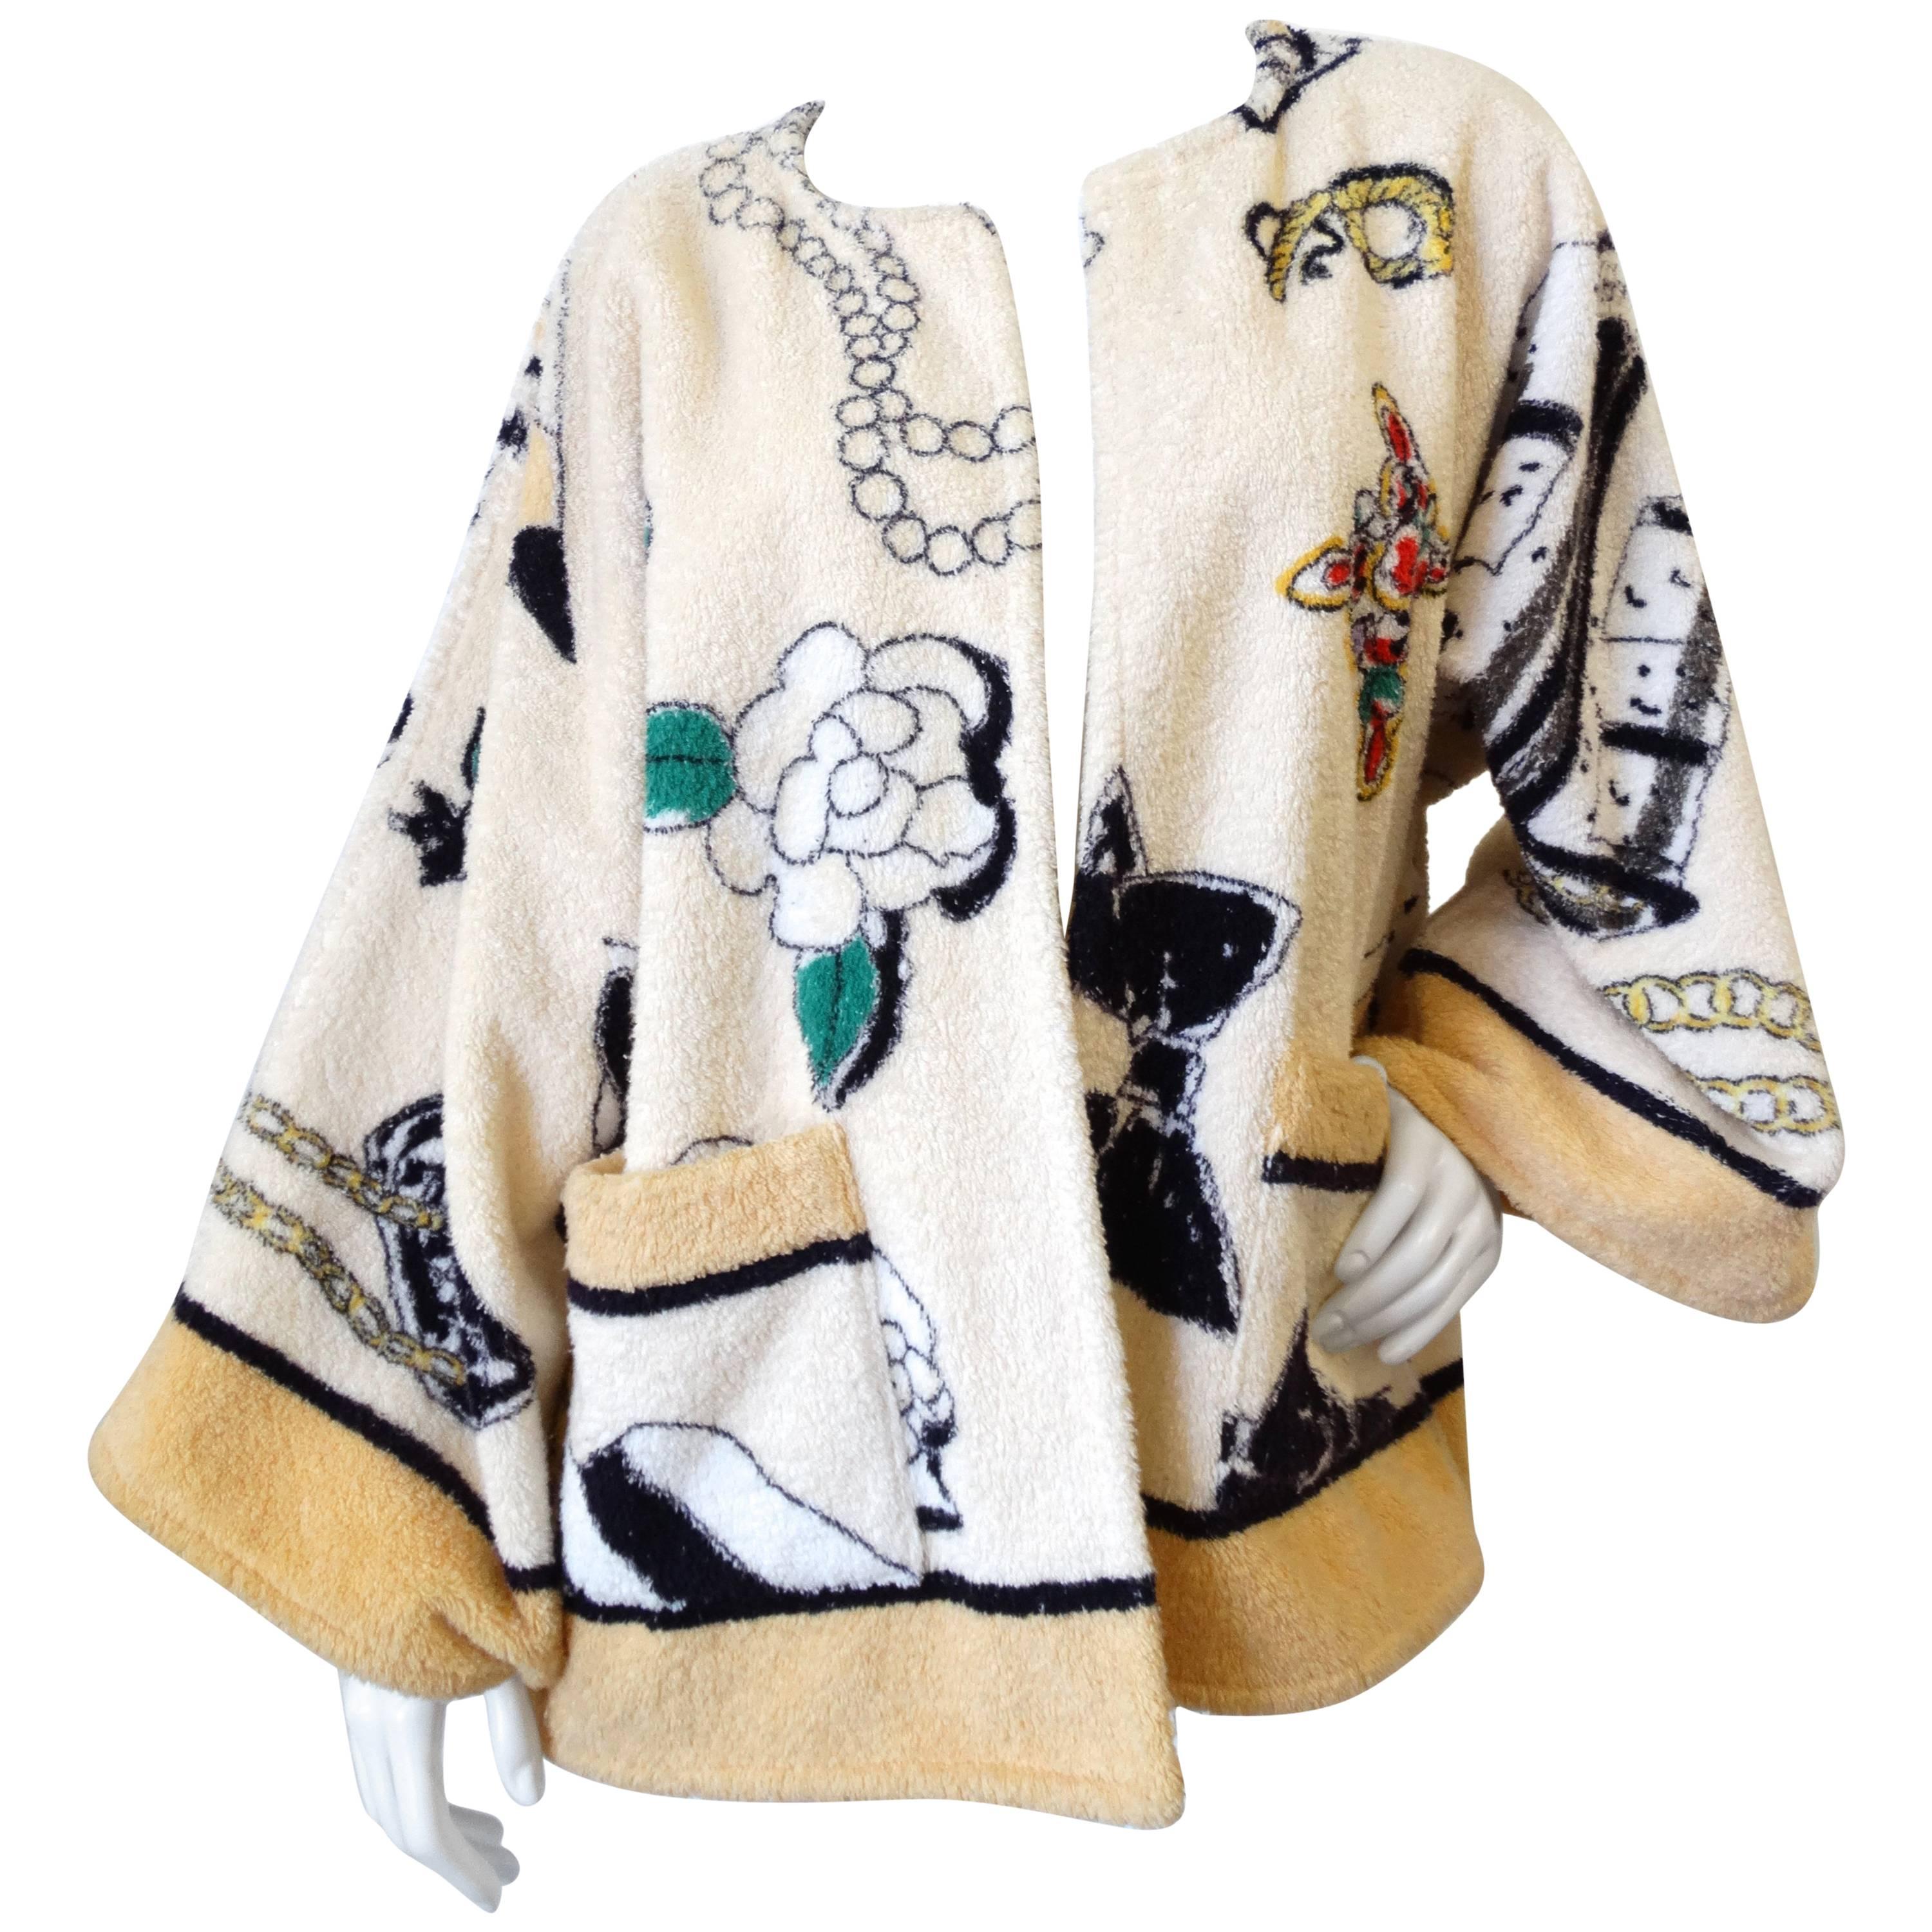 1994 Spring/Summer Chanel "Iconic" Print Terrycloth Beach Wrap/Robe